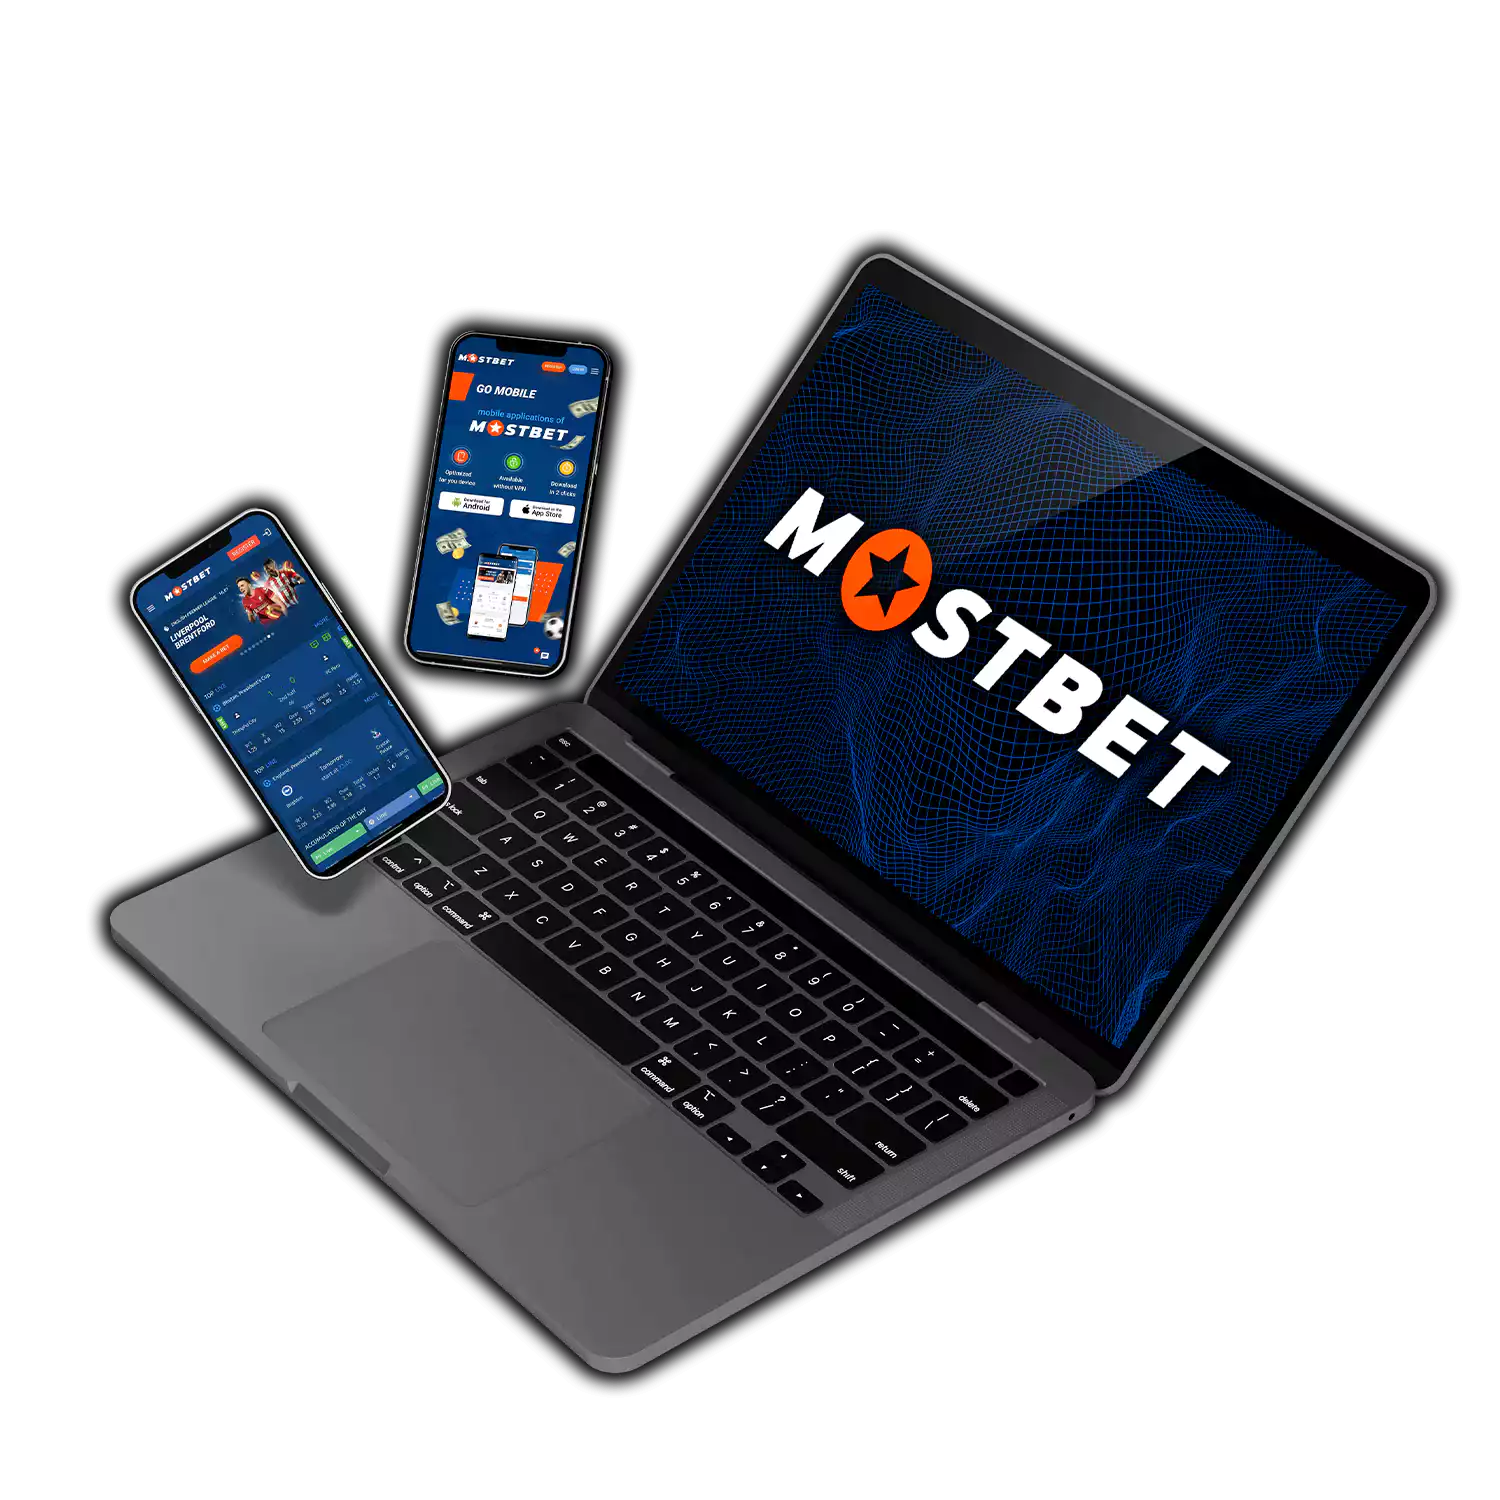 What's New About Win Big at Mostbet: Top Betting Company and Casino in Egypt!